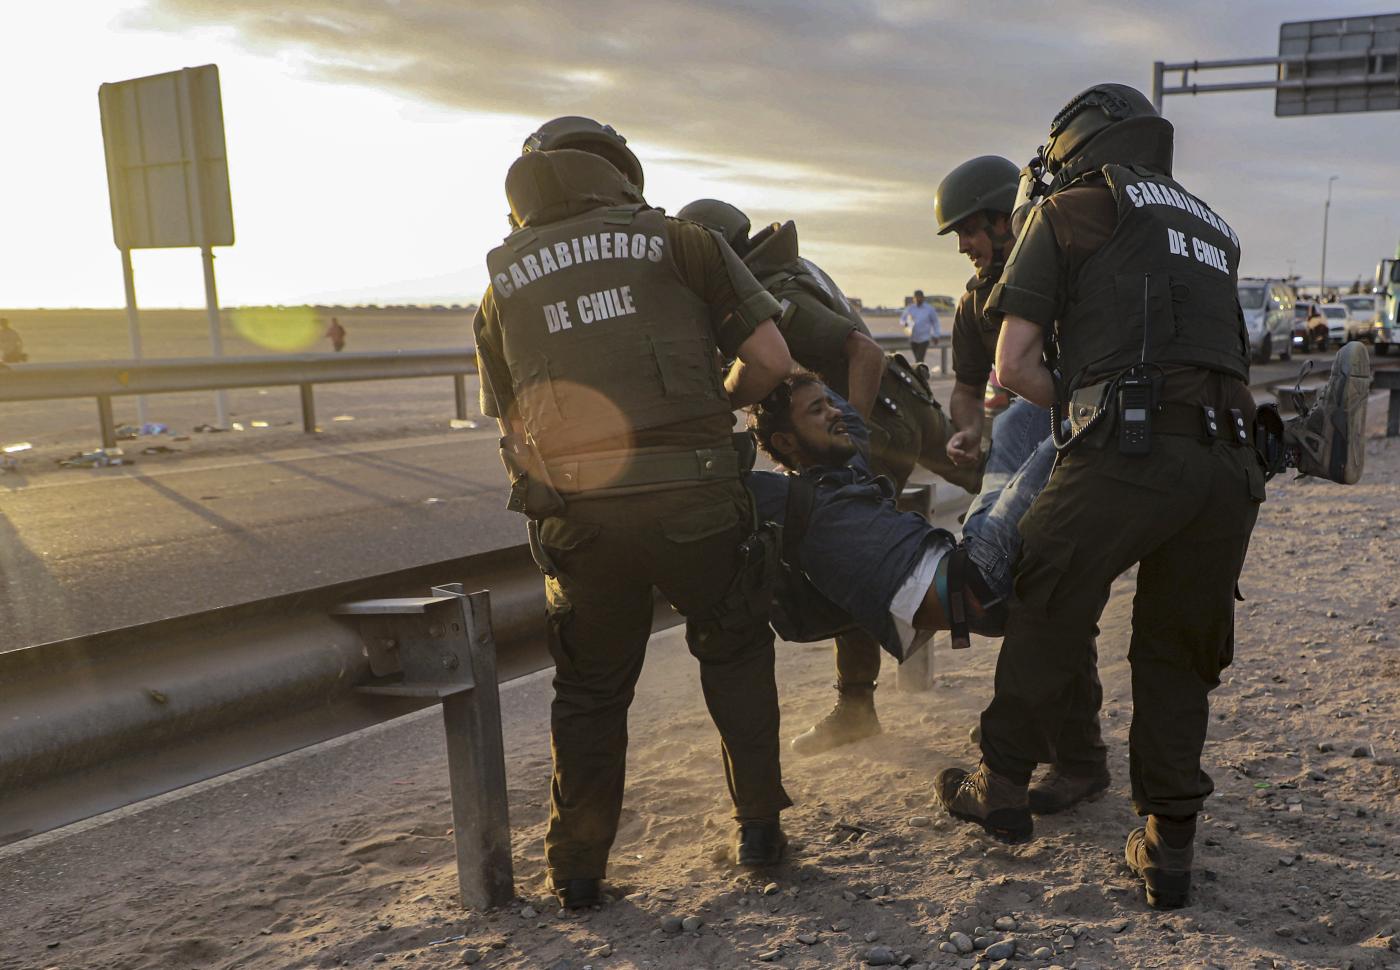 A migrant is detained by Chilean Police as he blocked the highway on the Chile-Peru border, near Arica, Chile, Tuesday, May 2, 2023. A migration crisis at the border between Chile and Peru has intensified as migrants who claim the want to go home remained stranded, unable to enter Peru. (AP Photo/Agustin Mercado)

Associated Press/LaPresse
Only Italy and Spain